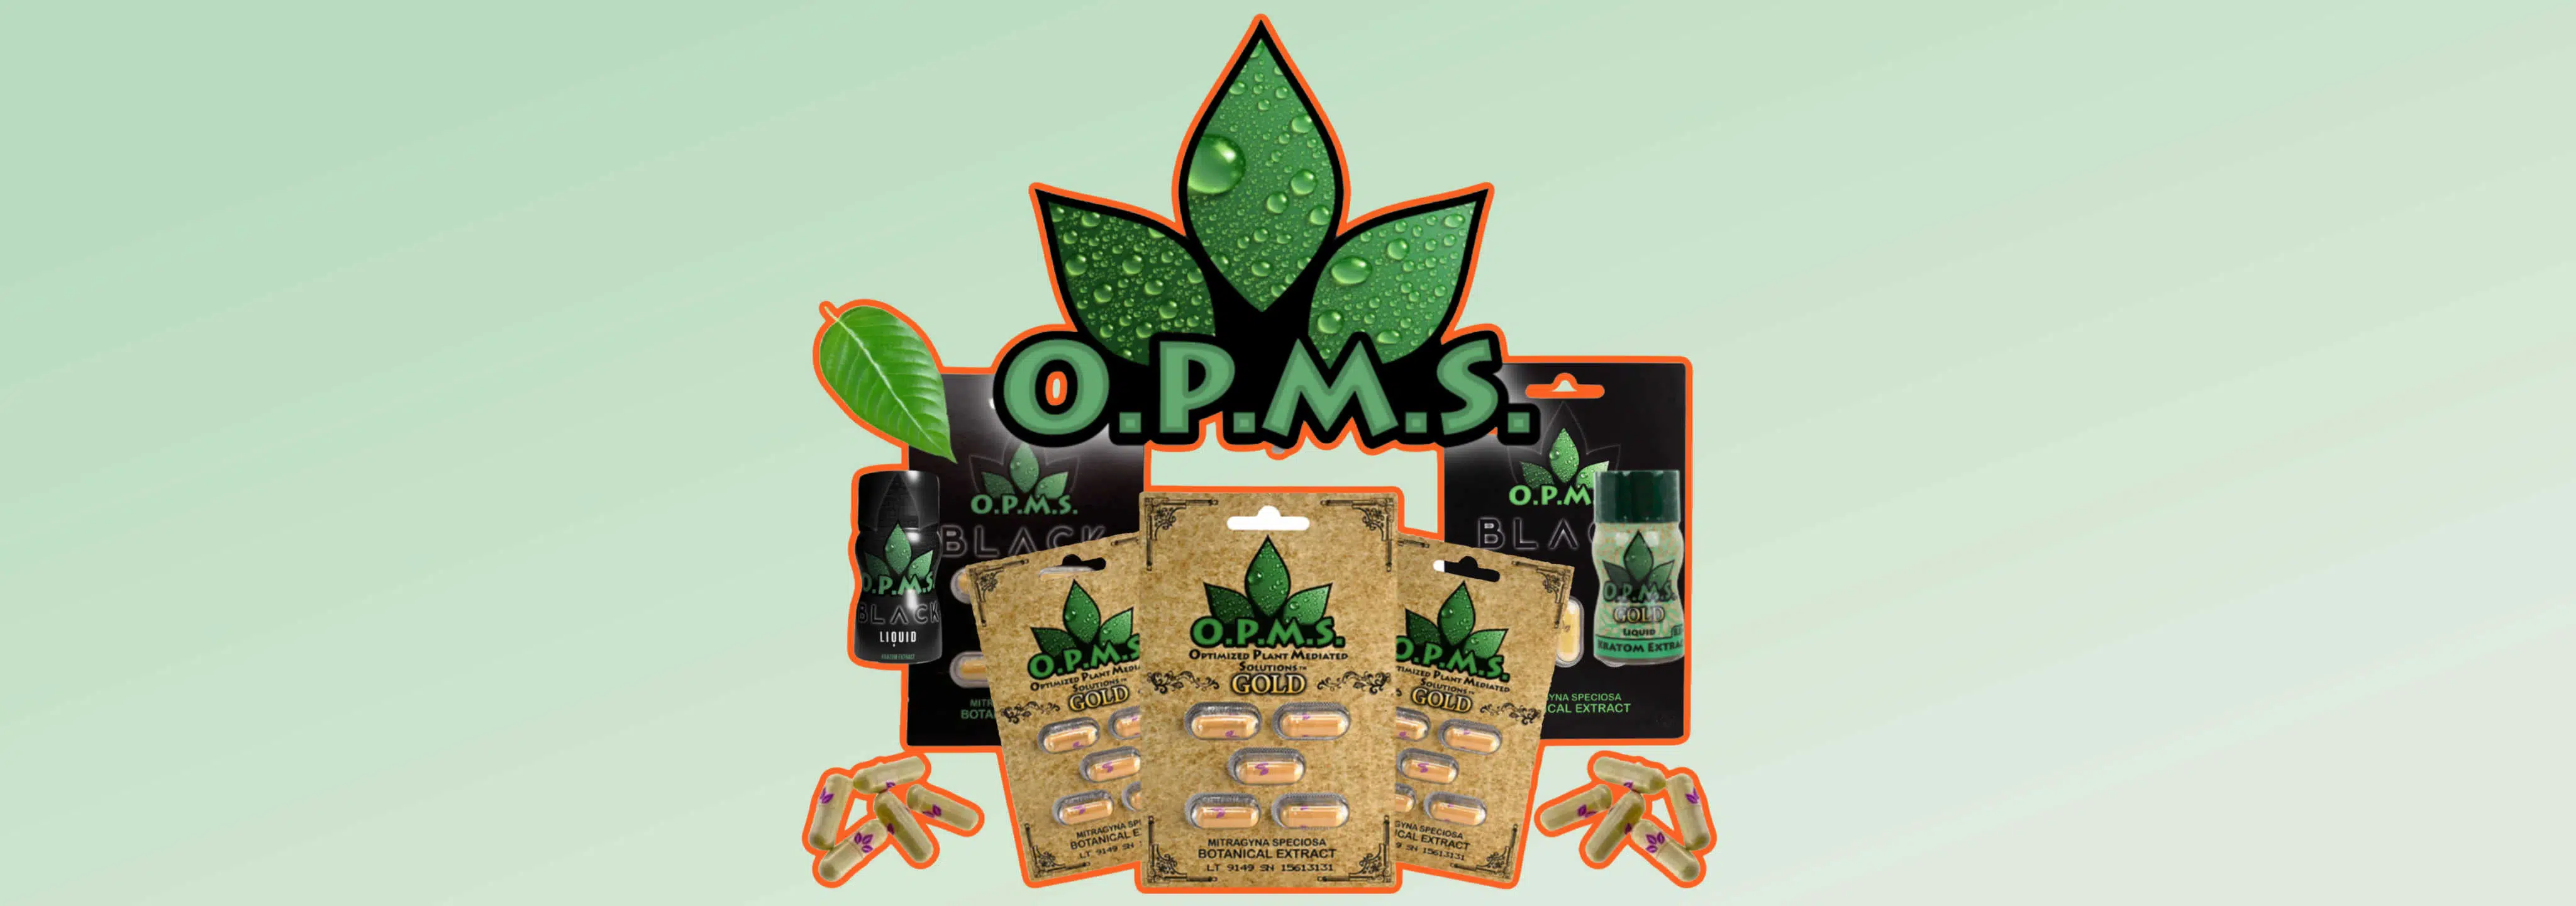 opms logo and product samples